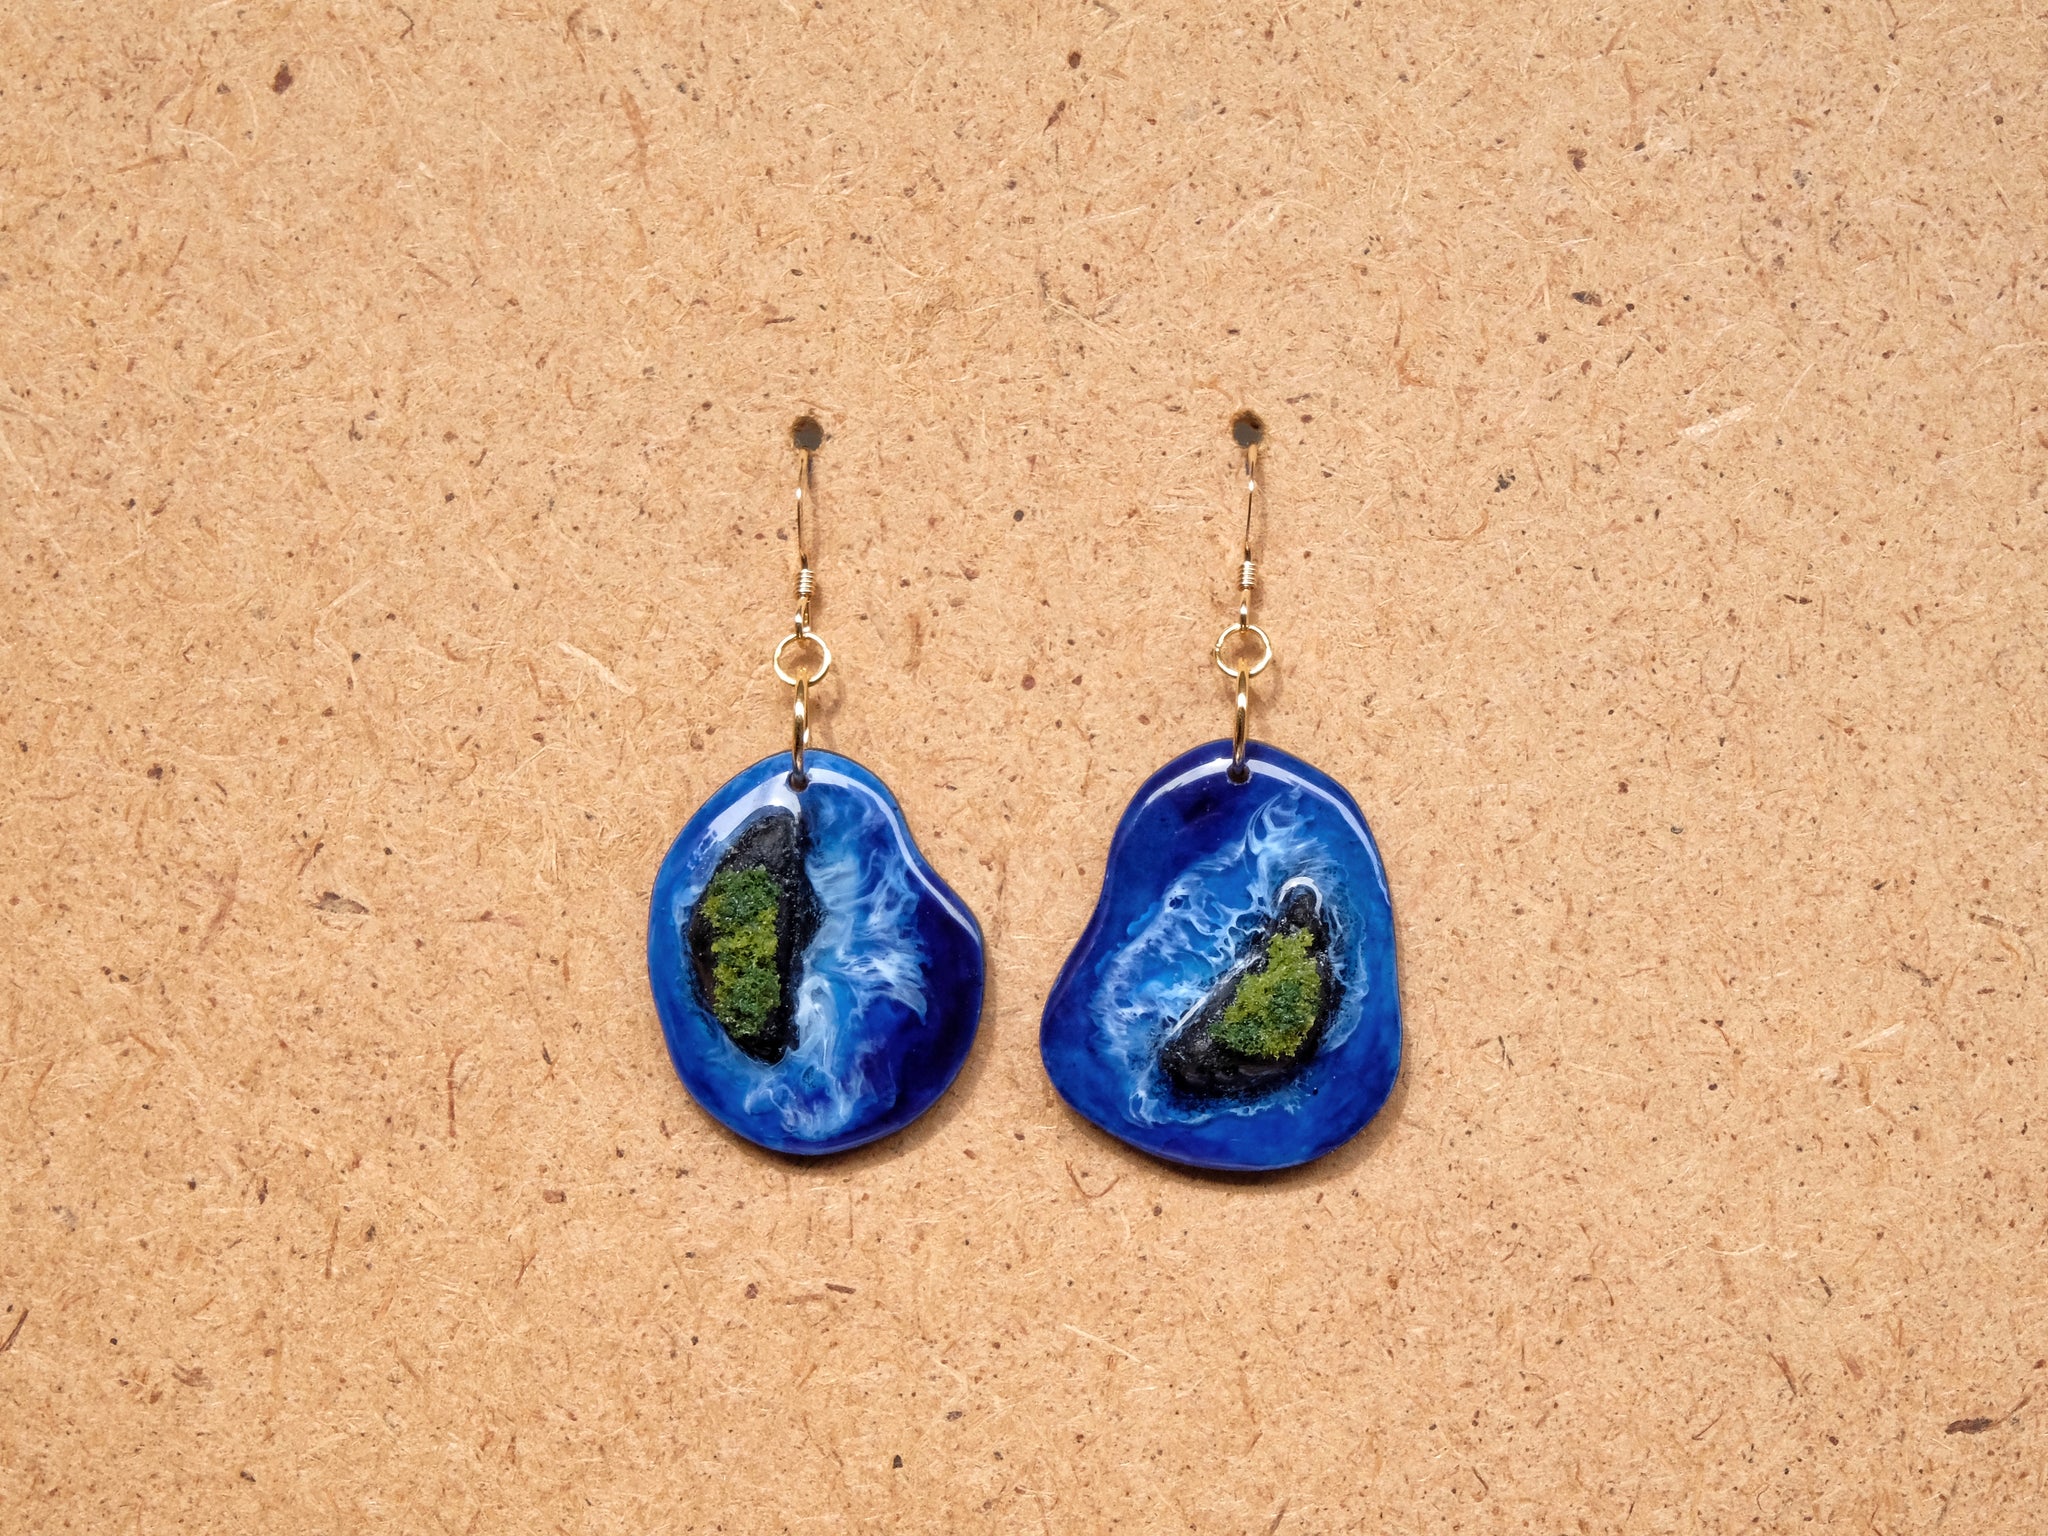 Island Earrings Collection: Blue on Black #1